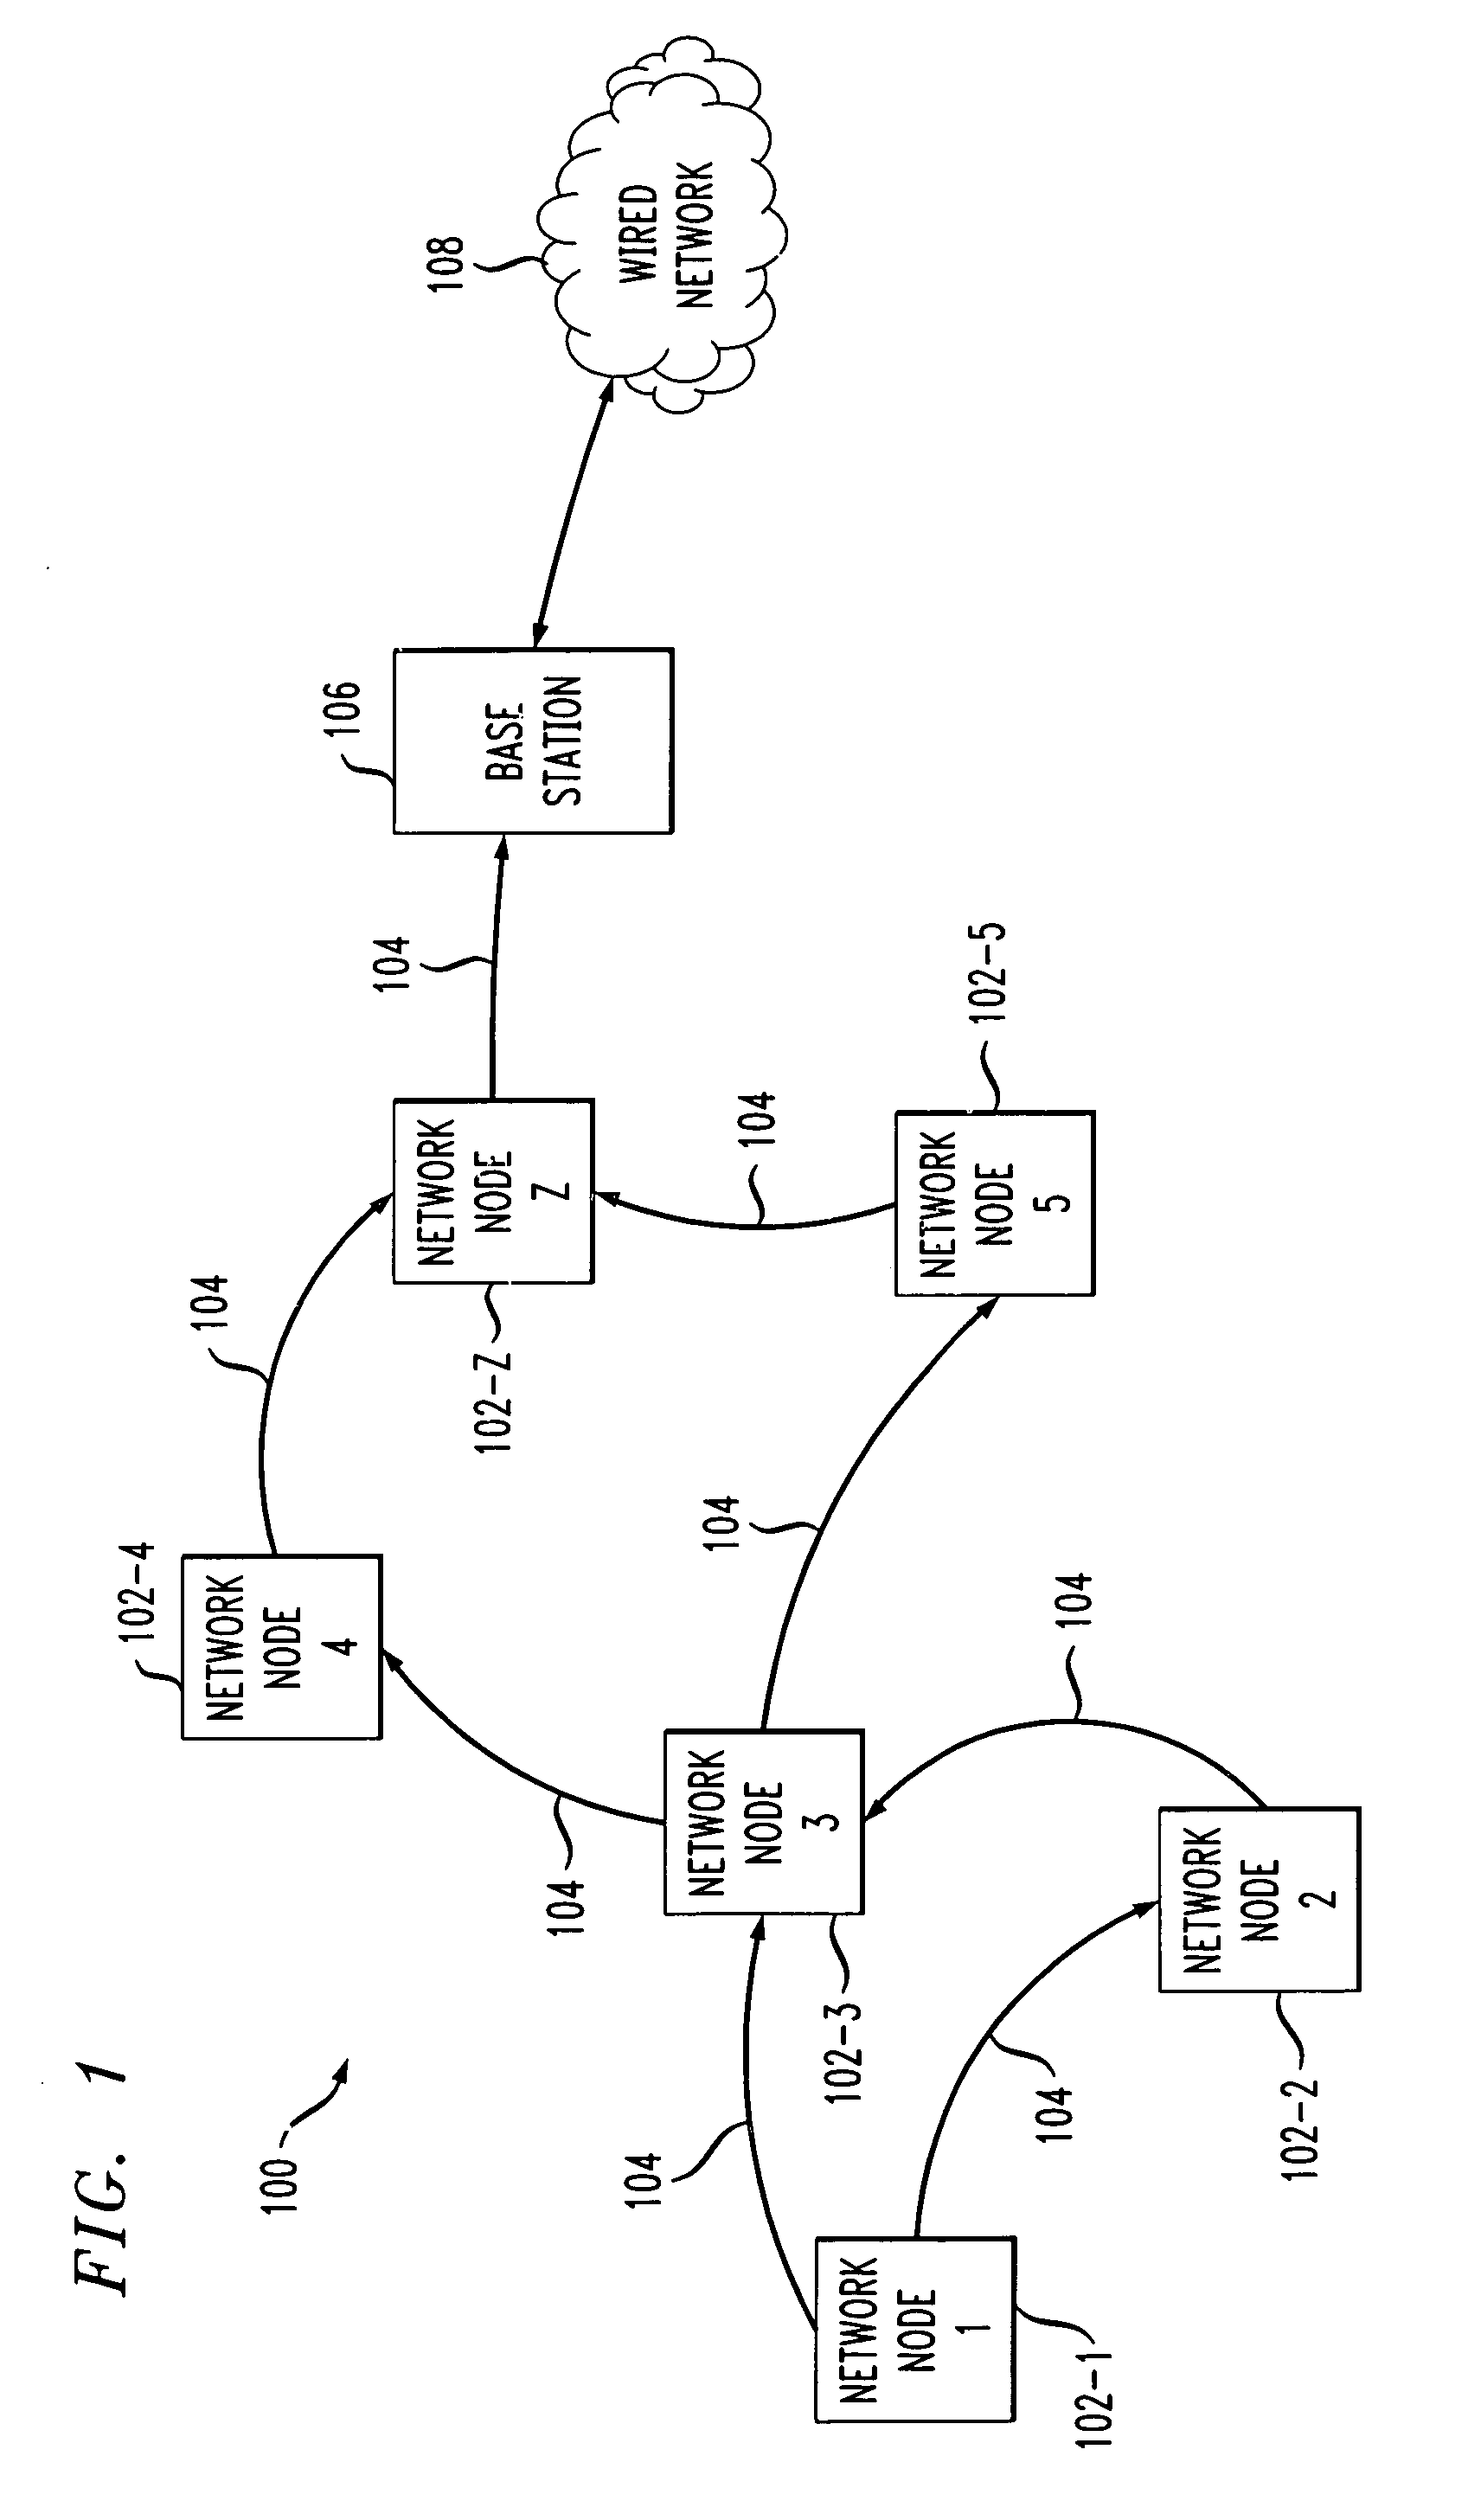 Routing in wireless ad-hoc networks